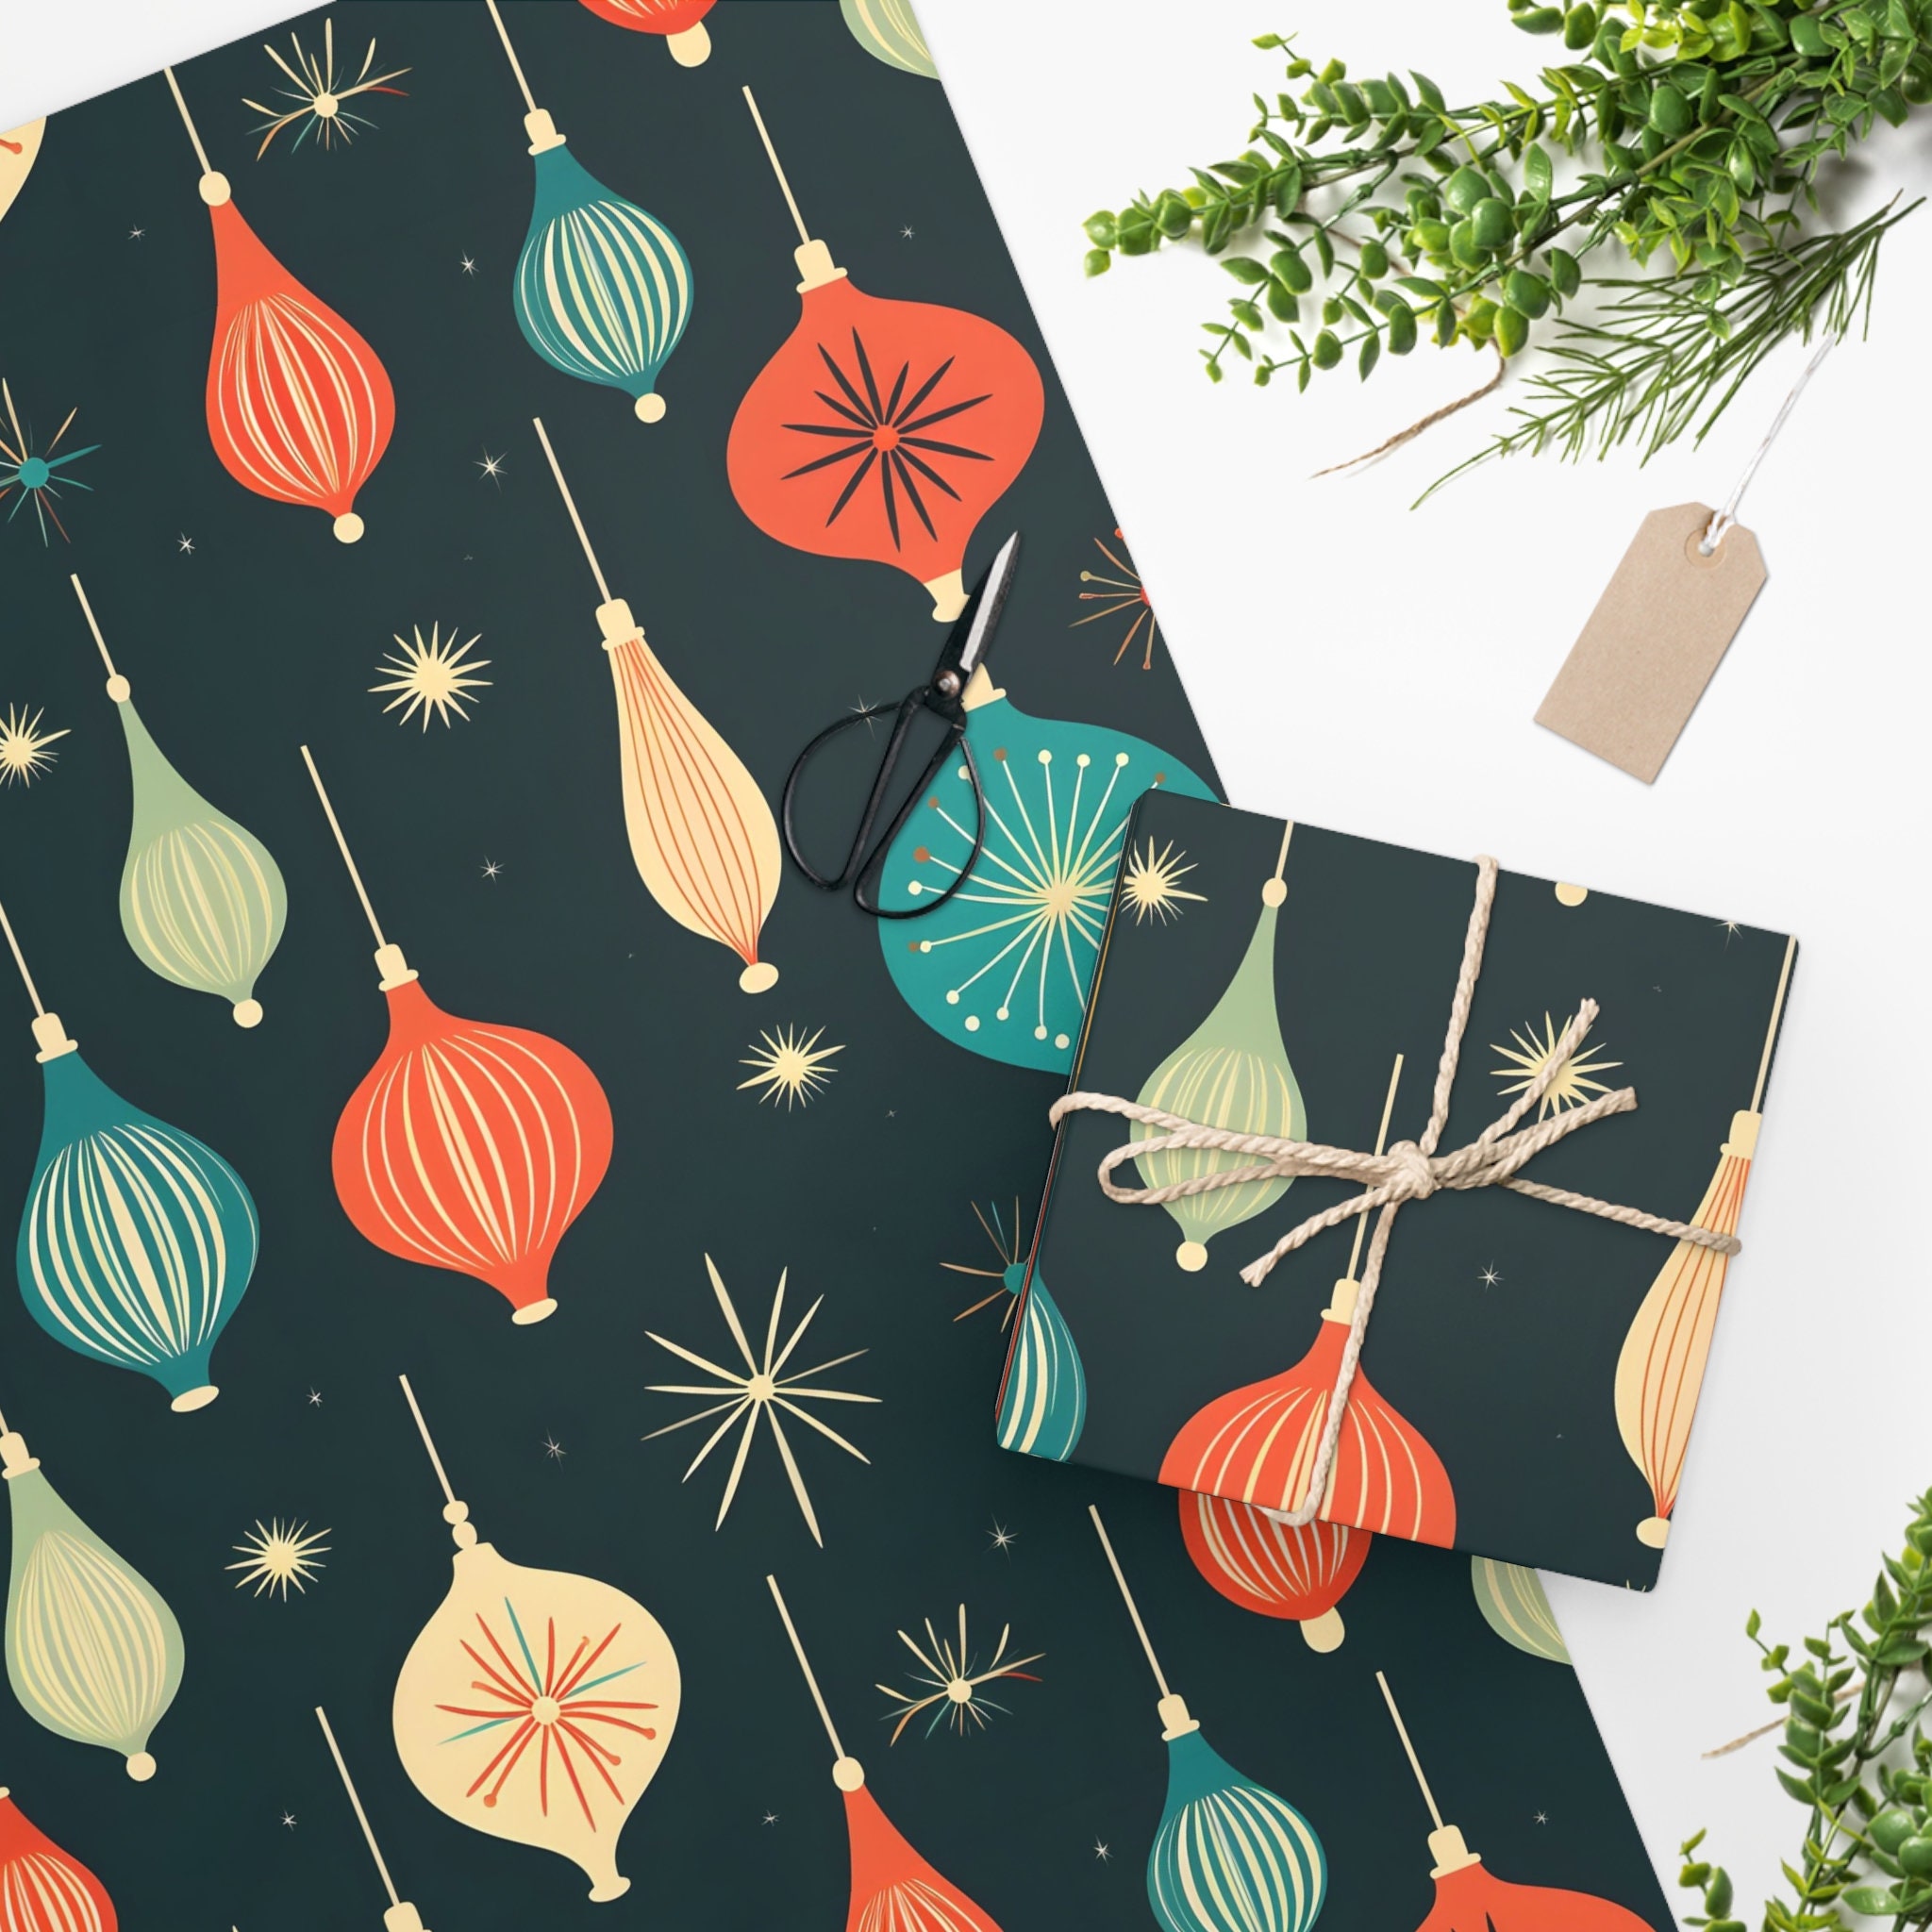 Vintage Christmas Ornament - Festive retro 1950s decorations Mid century  style Wrapping Paper by Katrinelly